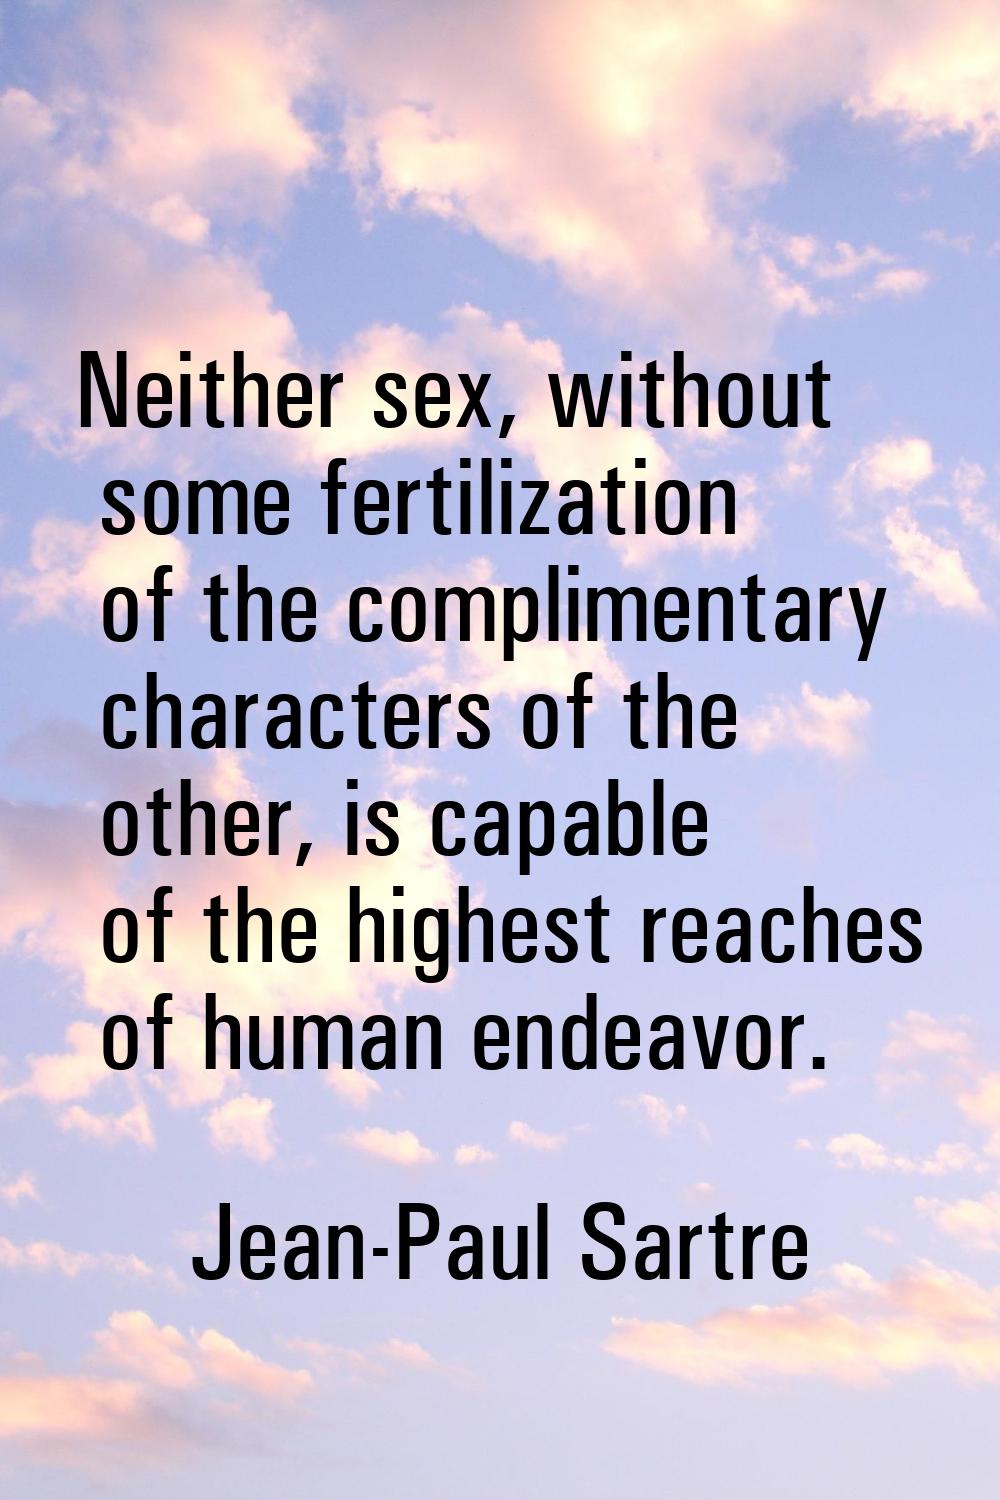 Neither sex, without some fertilization of the complimentary characters of the other, is capable of